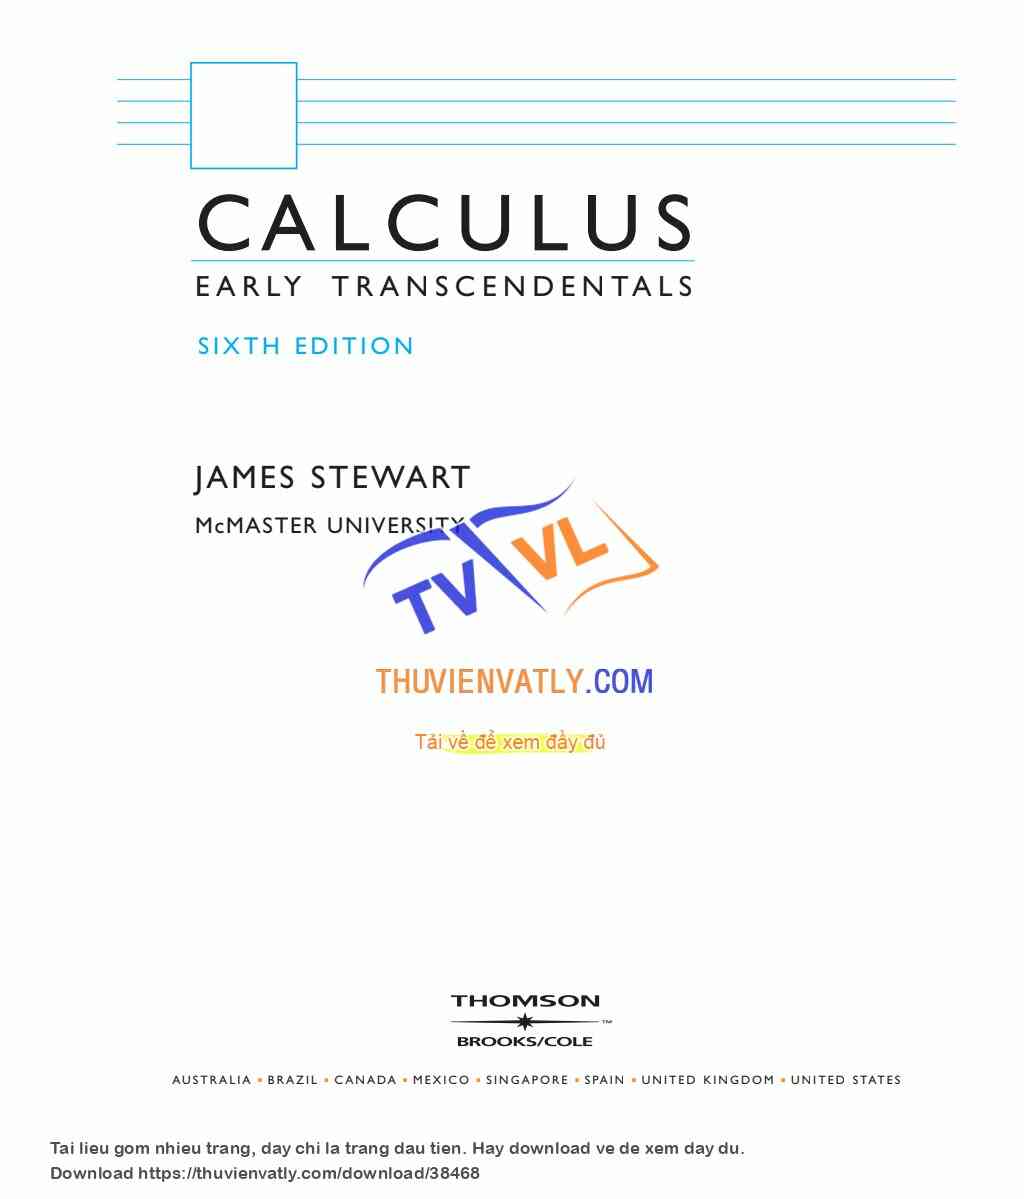 CALCULUS EARLY TRANSCENDENTALS